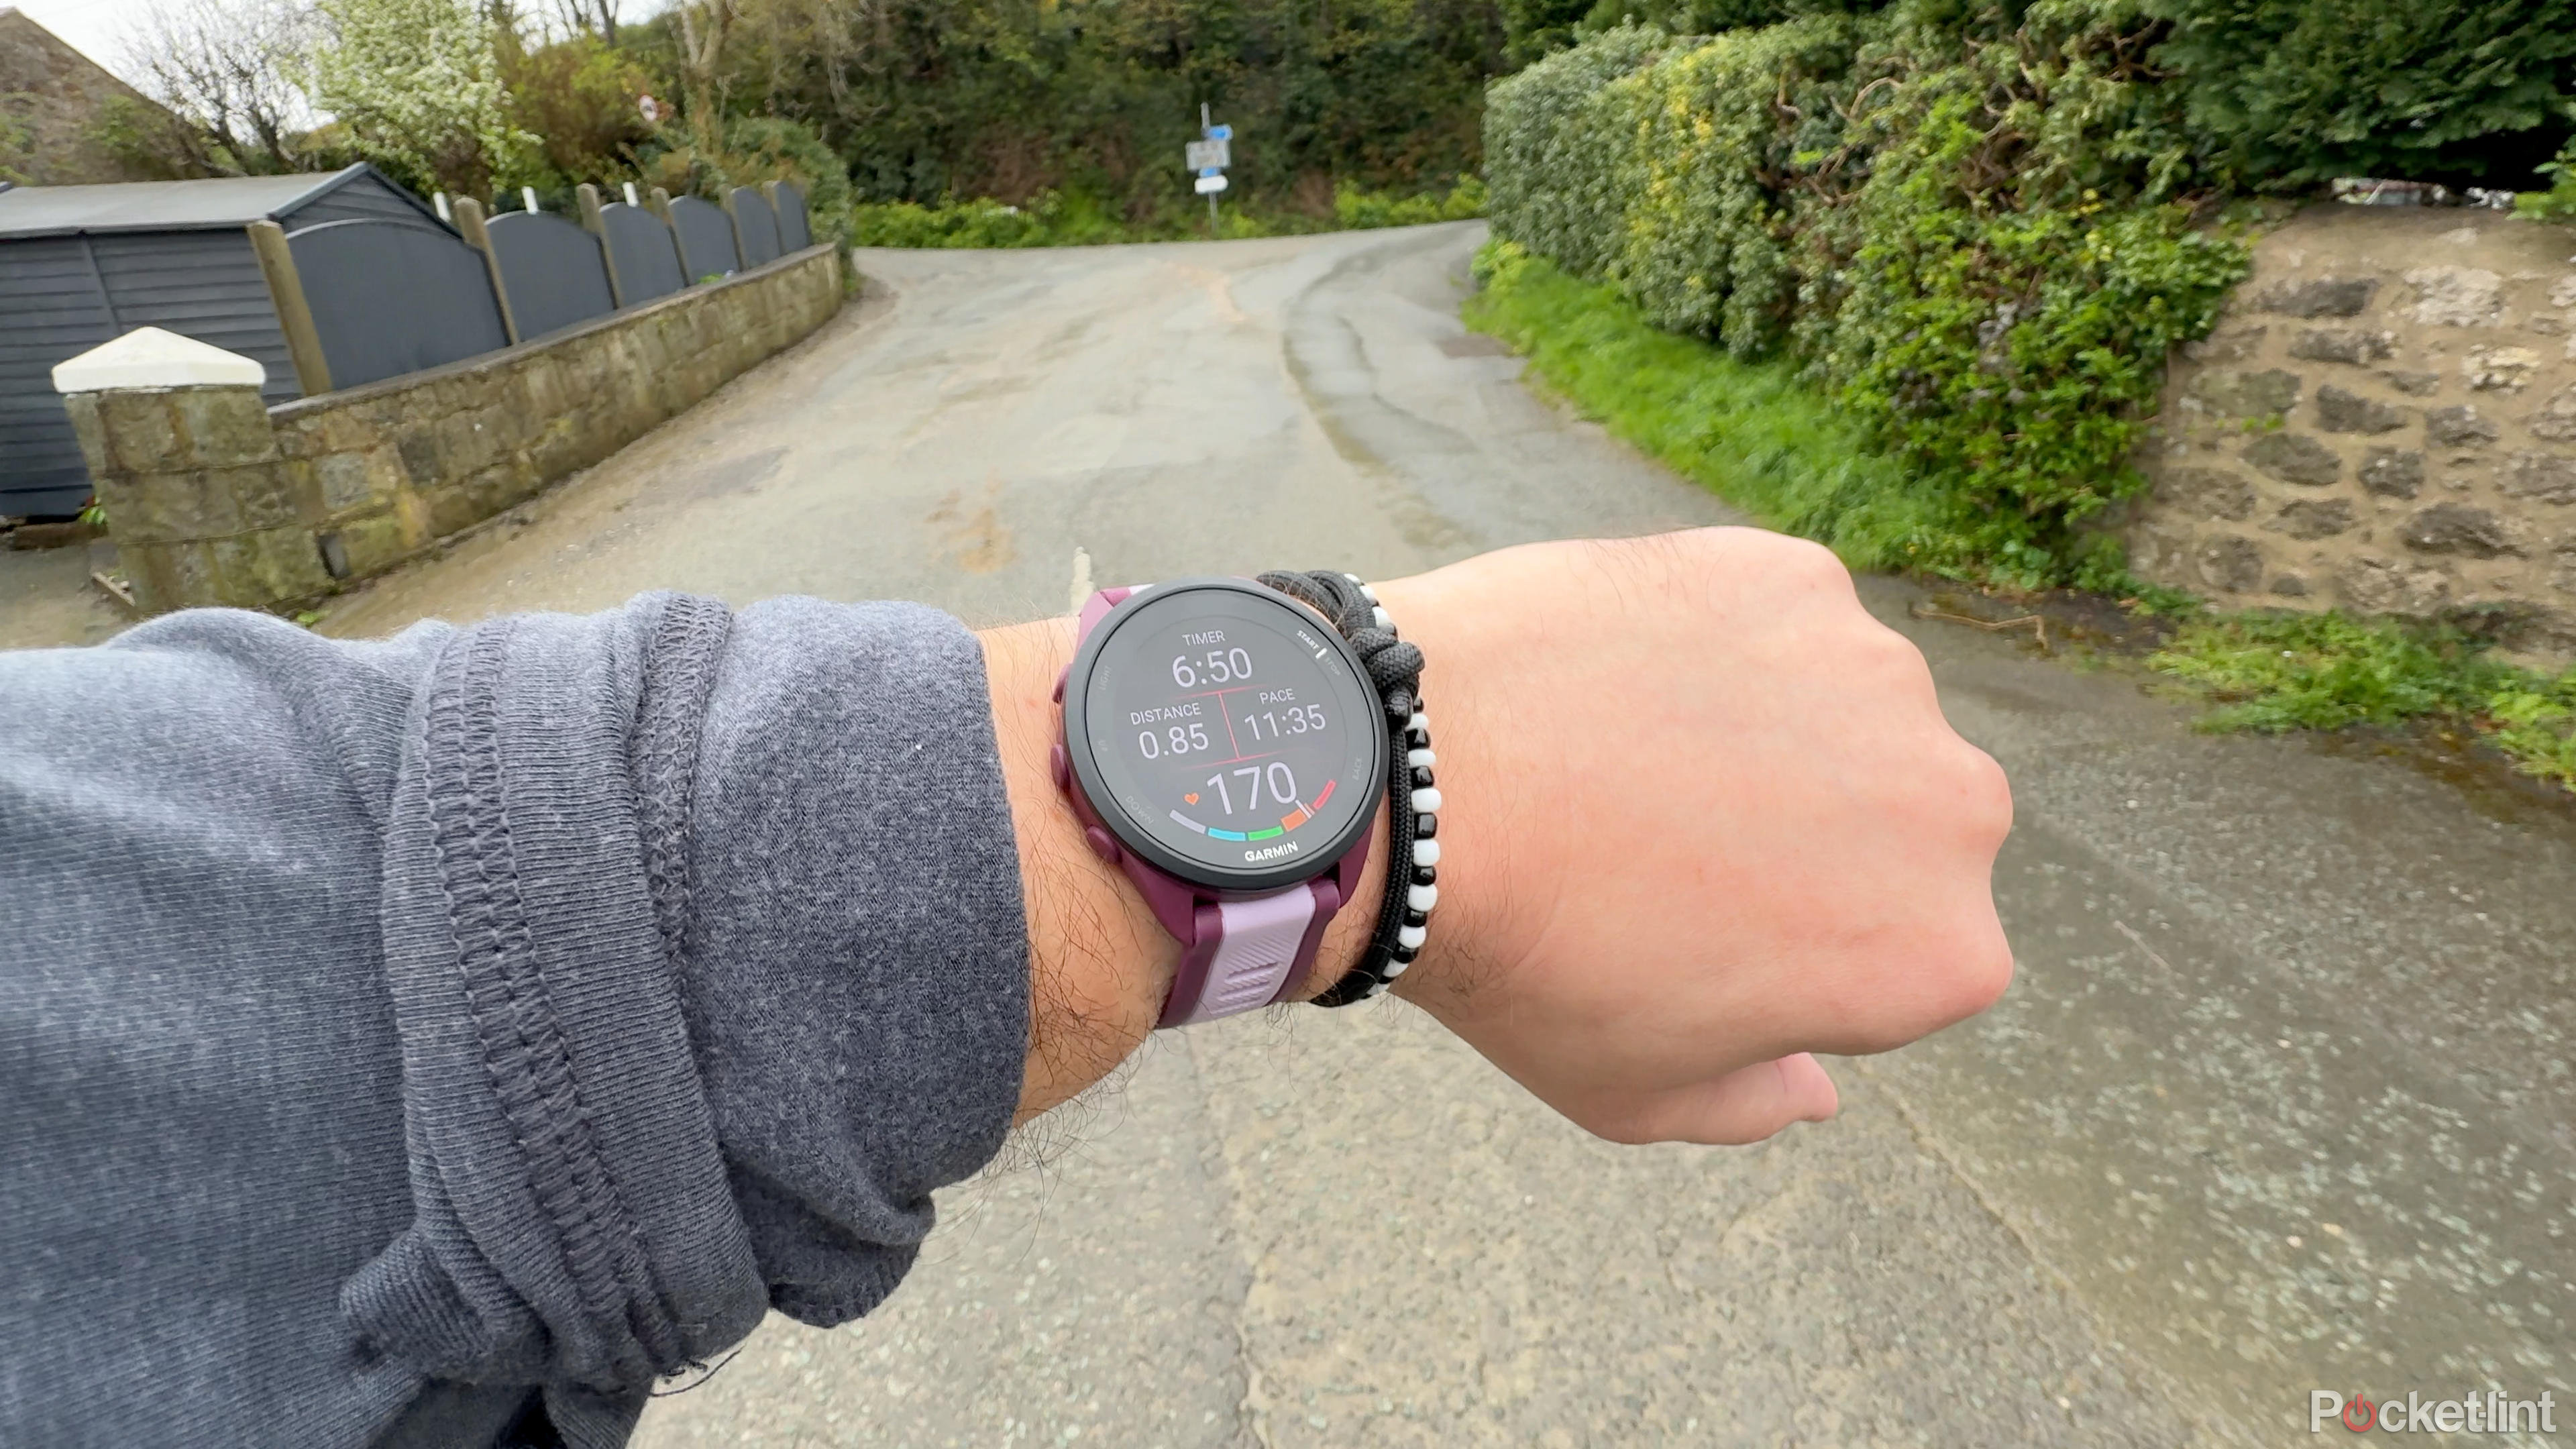 A person runs with the Forerunner 165 along a Welsh country road